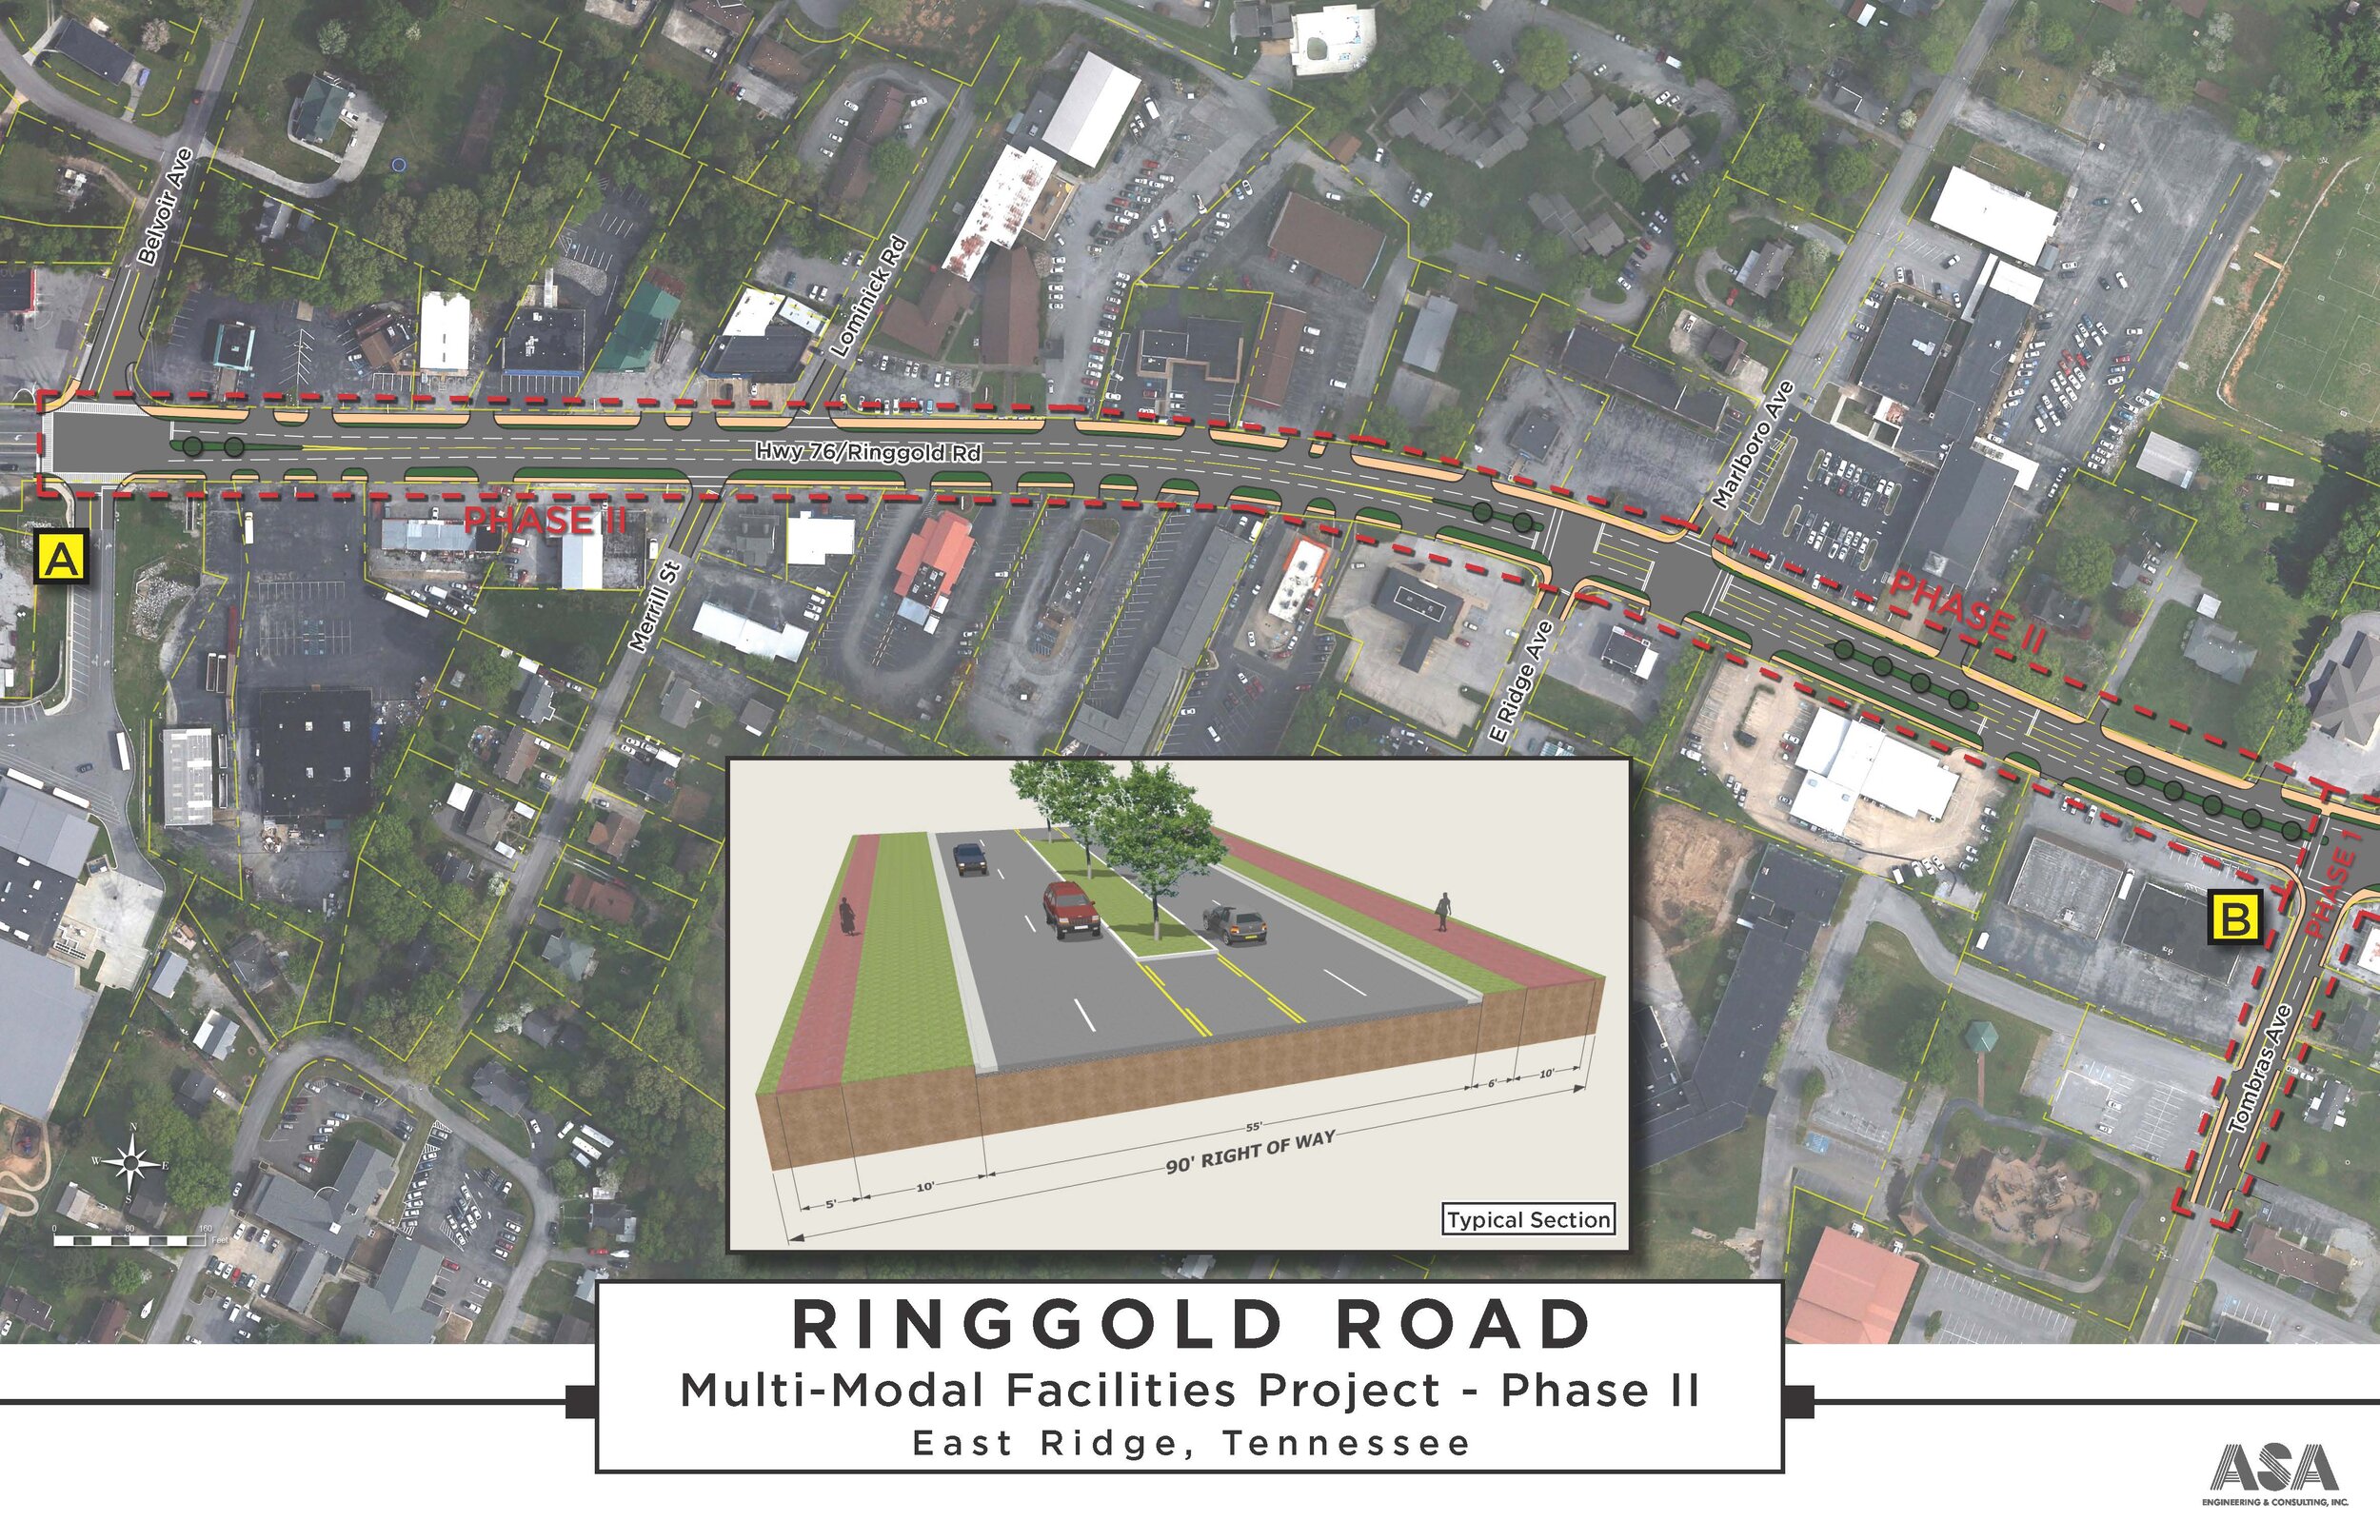 2014-11-13_Ringgold Road Phase 2 Concept.jpg